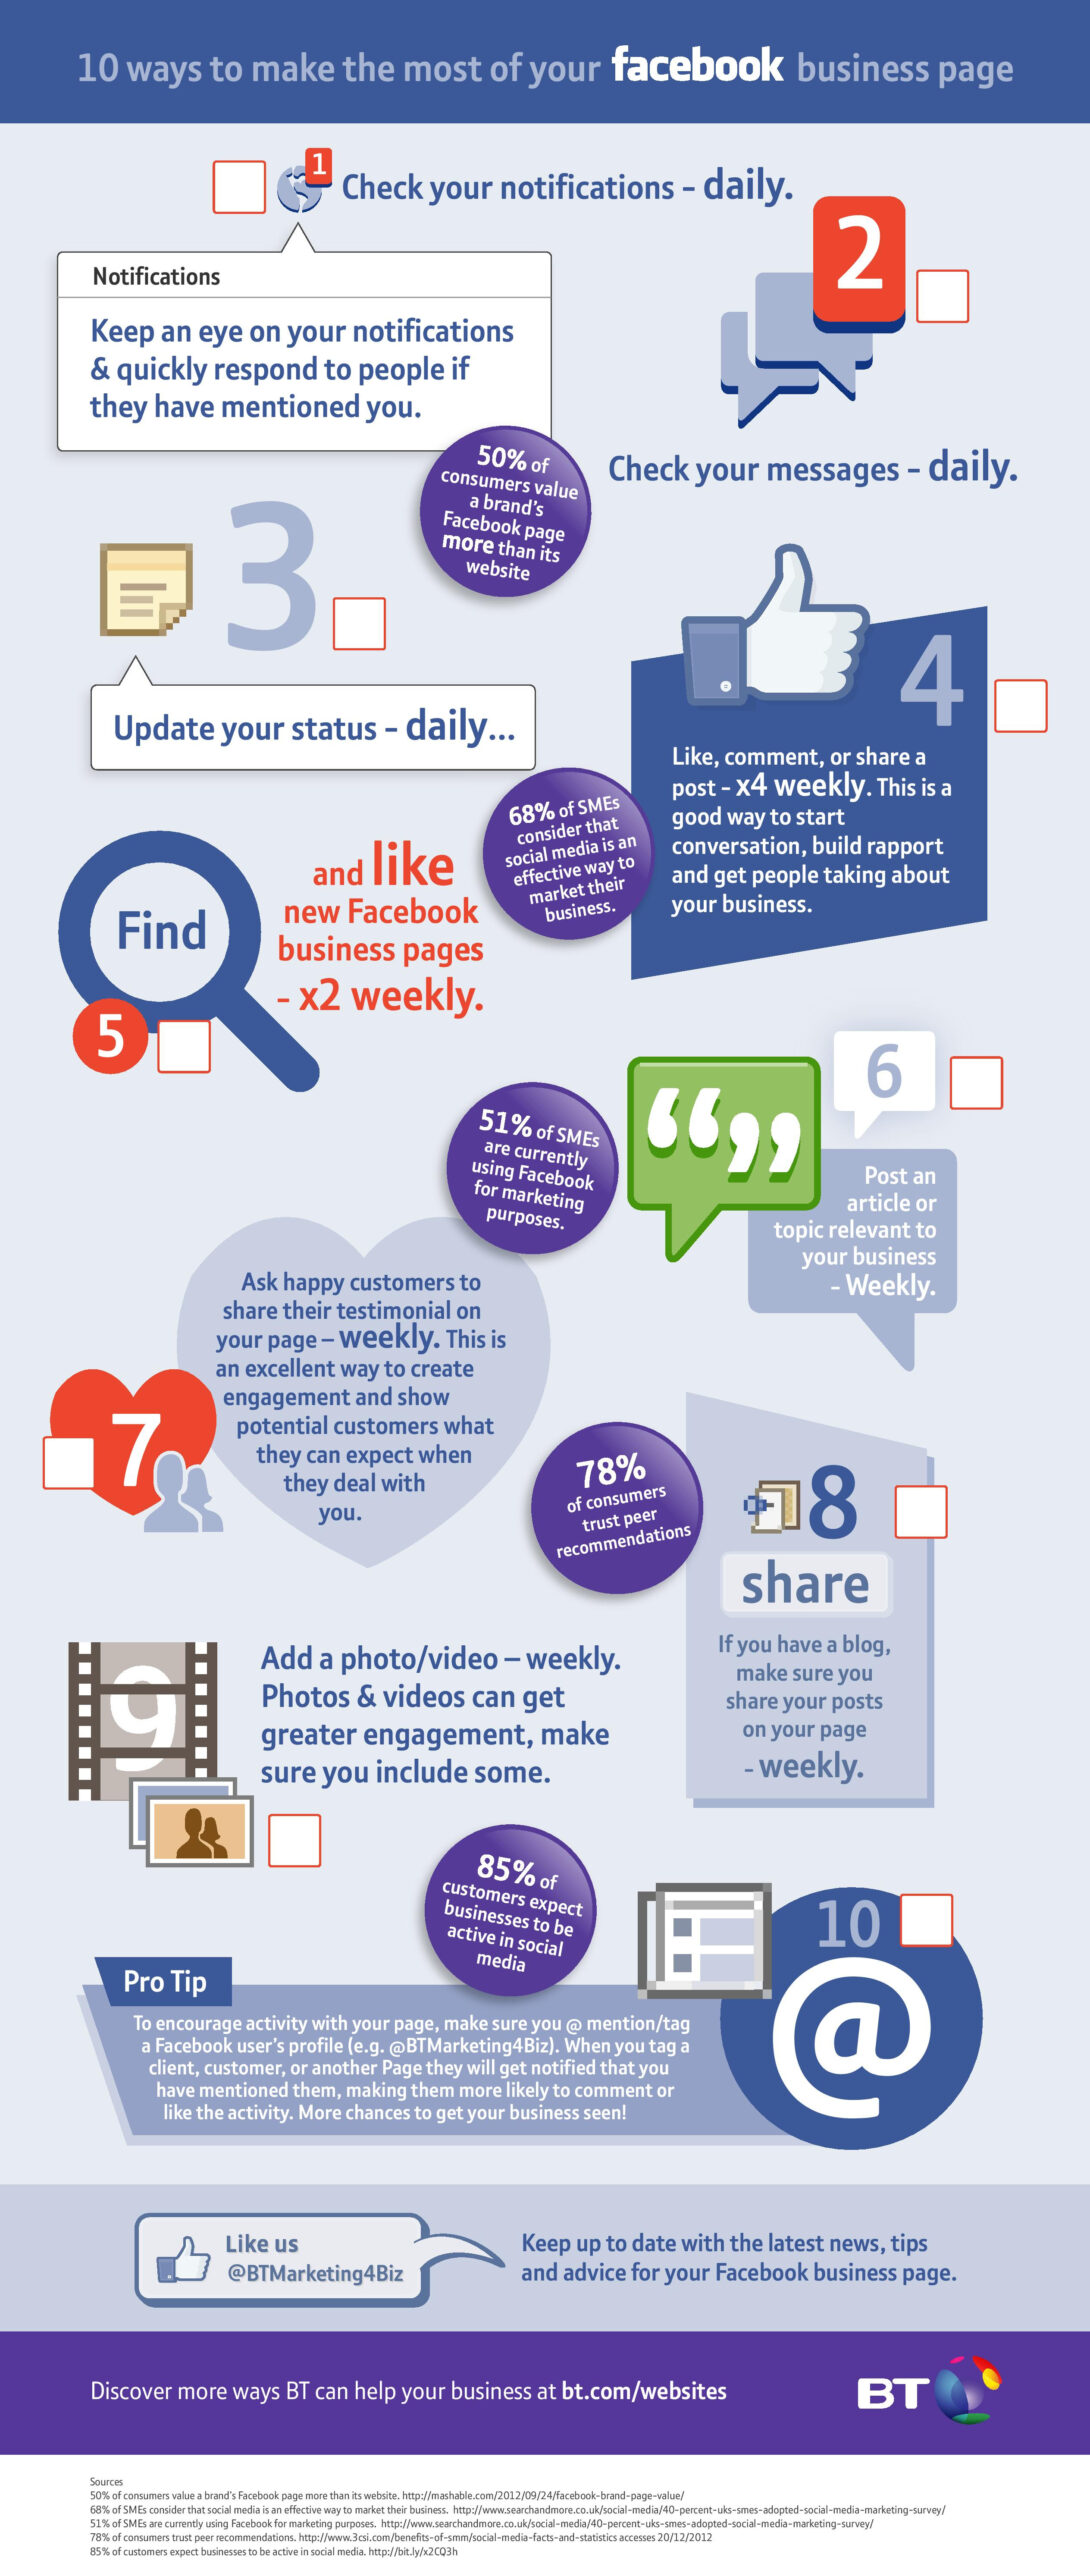 Facebook South Africa Infographic Report 2014 | Hashtag South Africa Social Media Pty Ltd